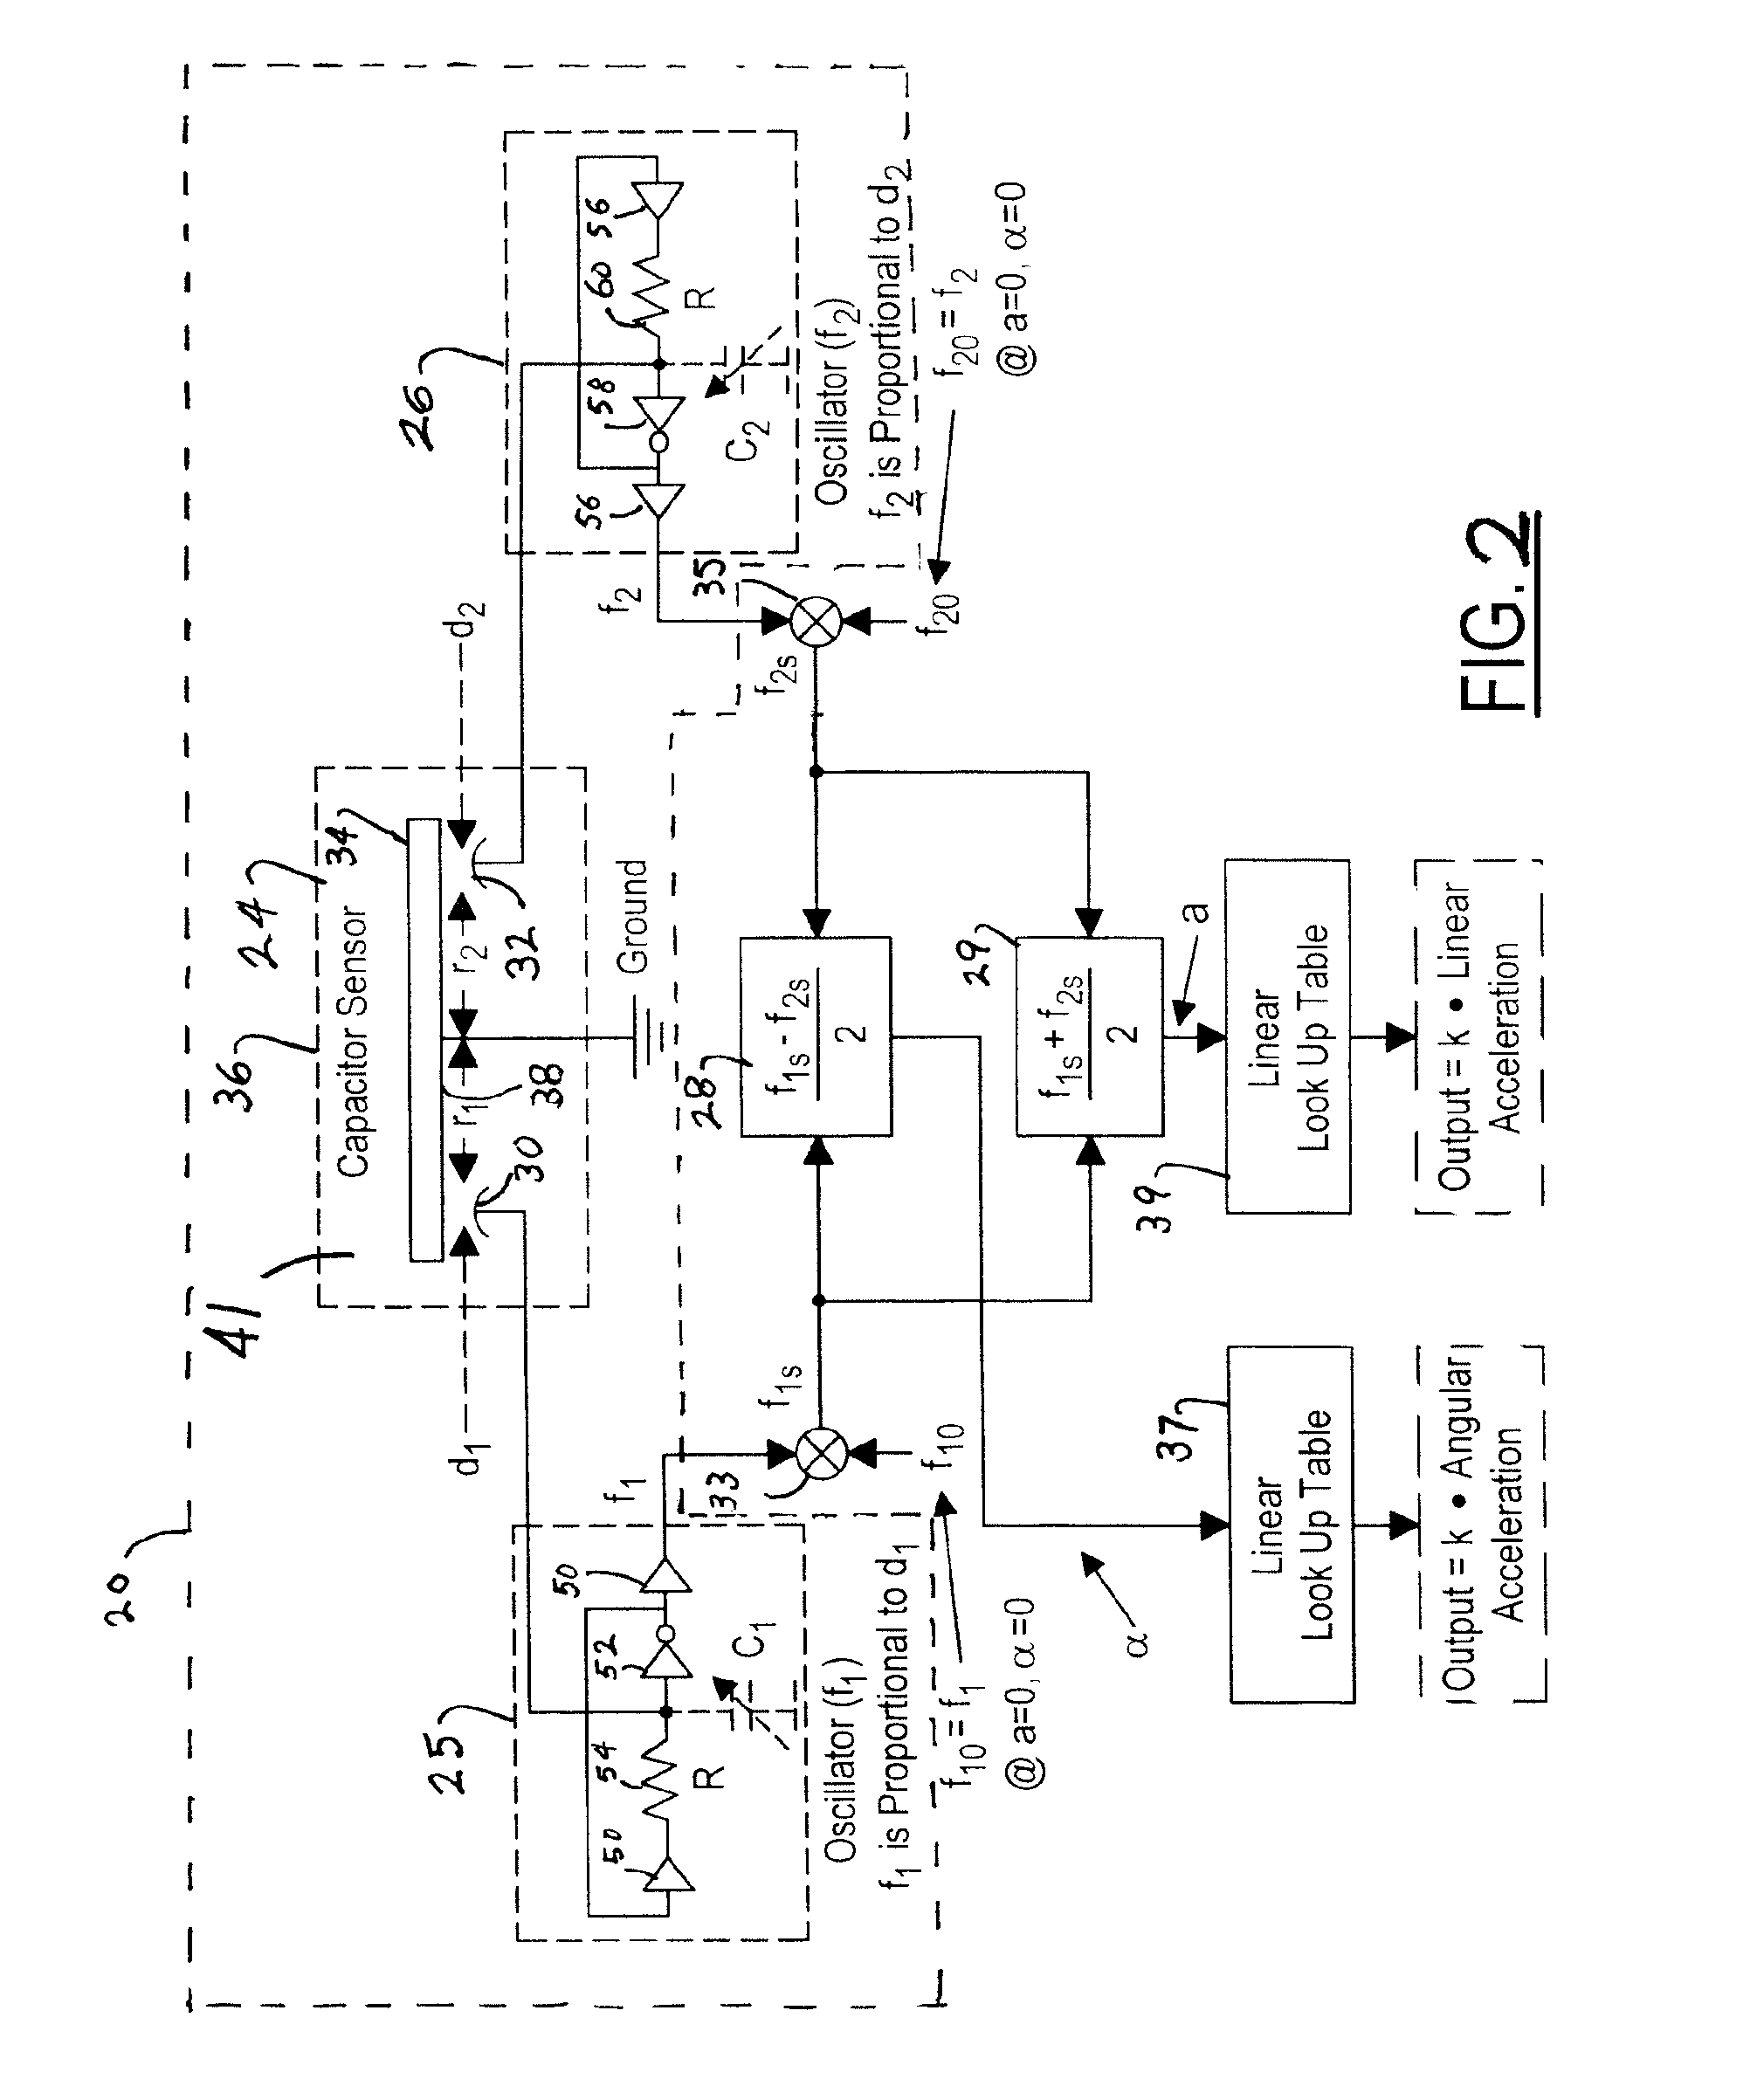 Angular and linear flexure plate accelerometer